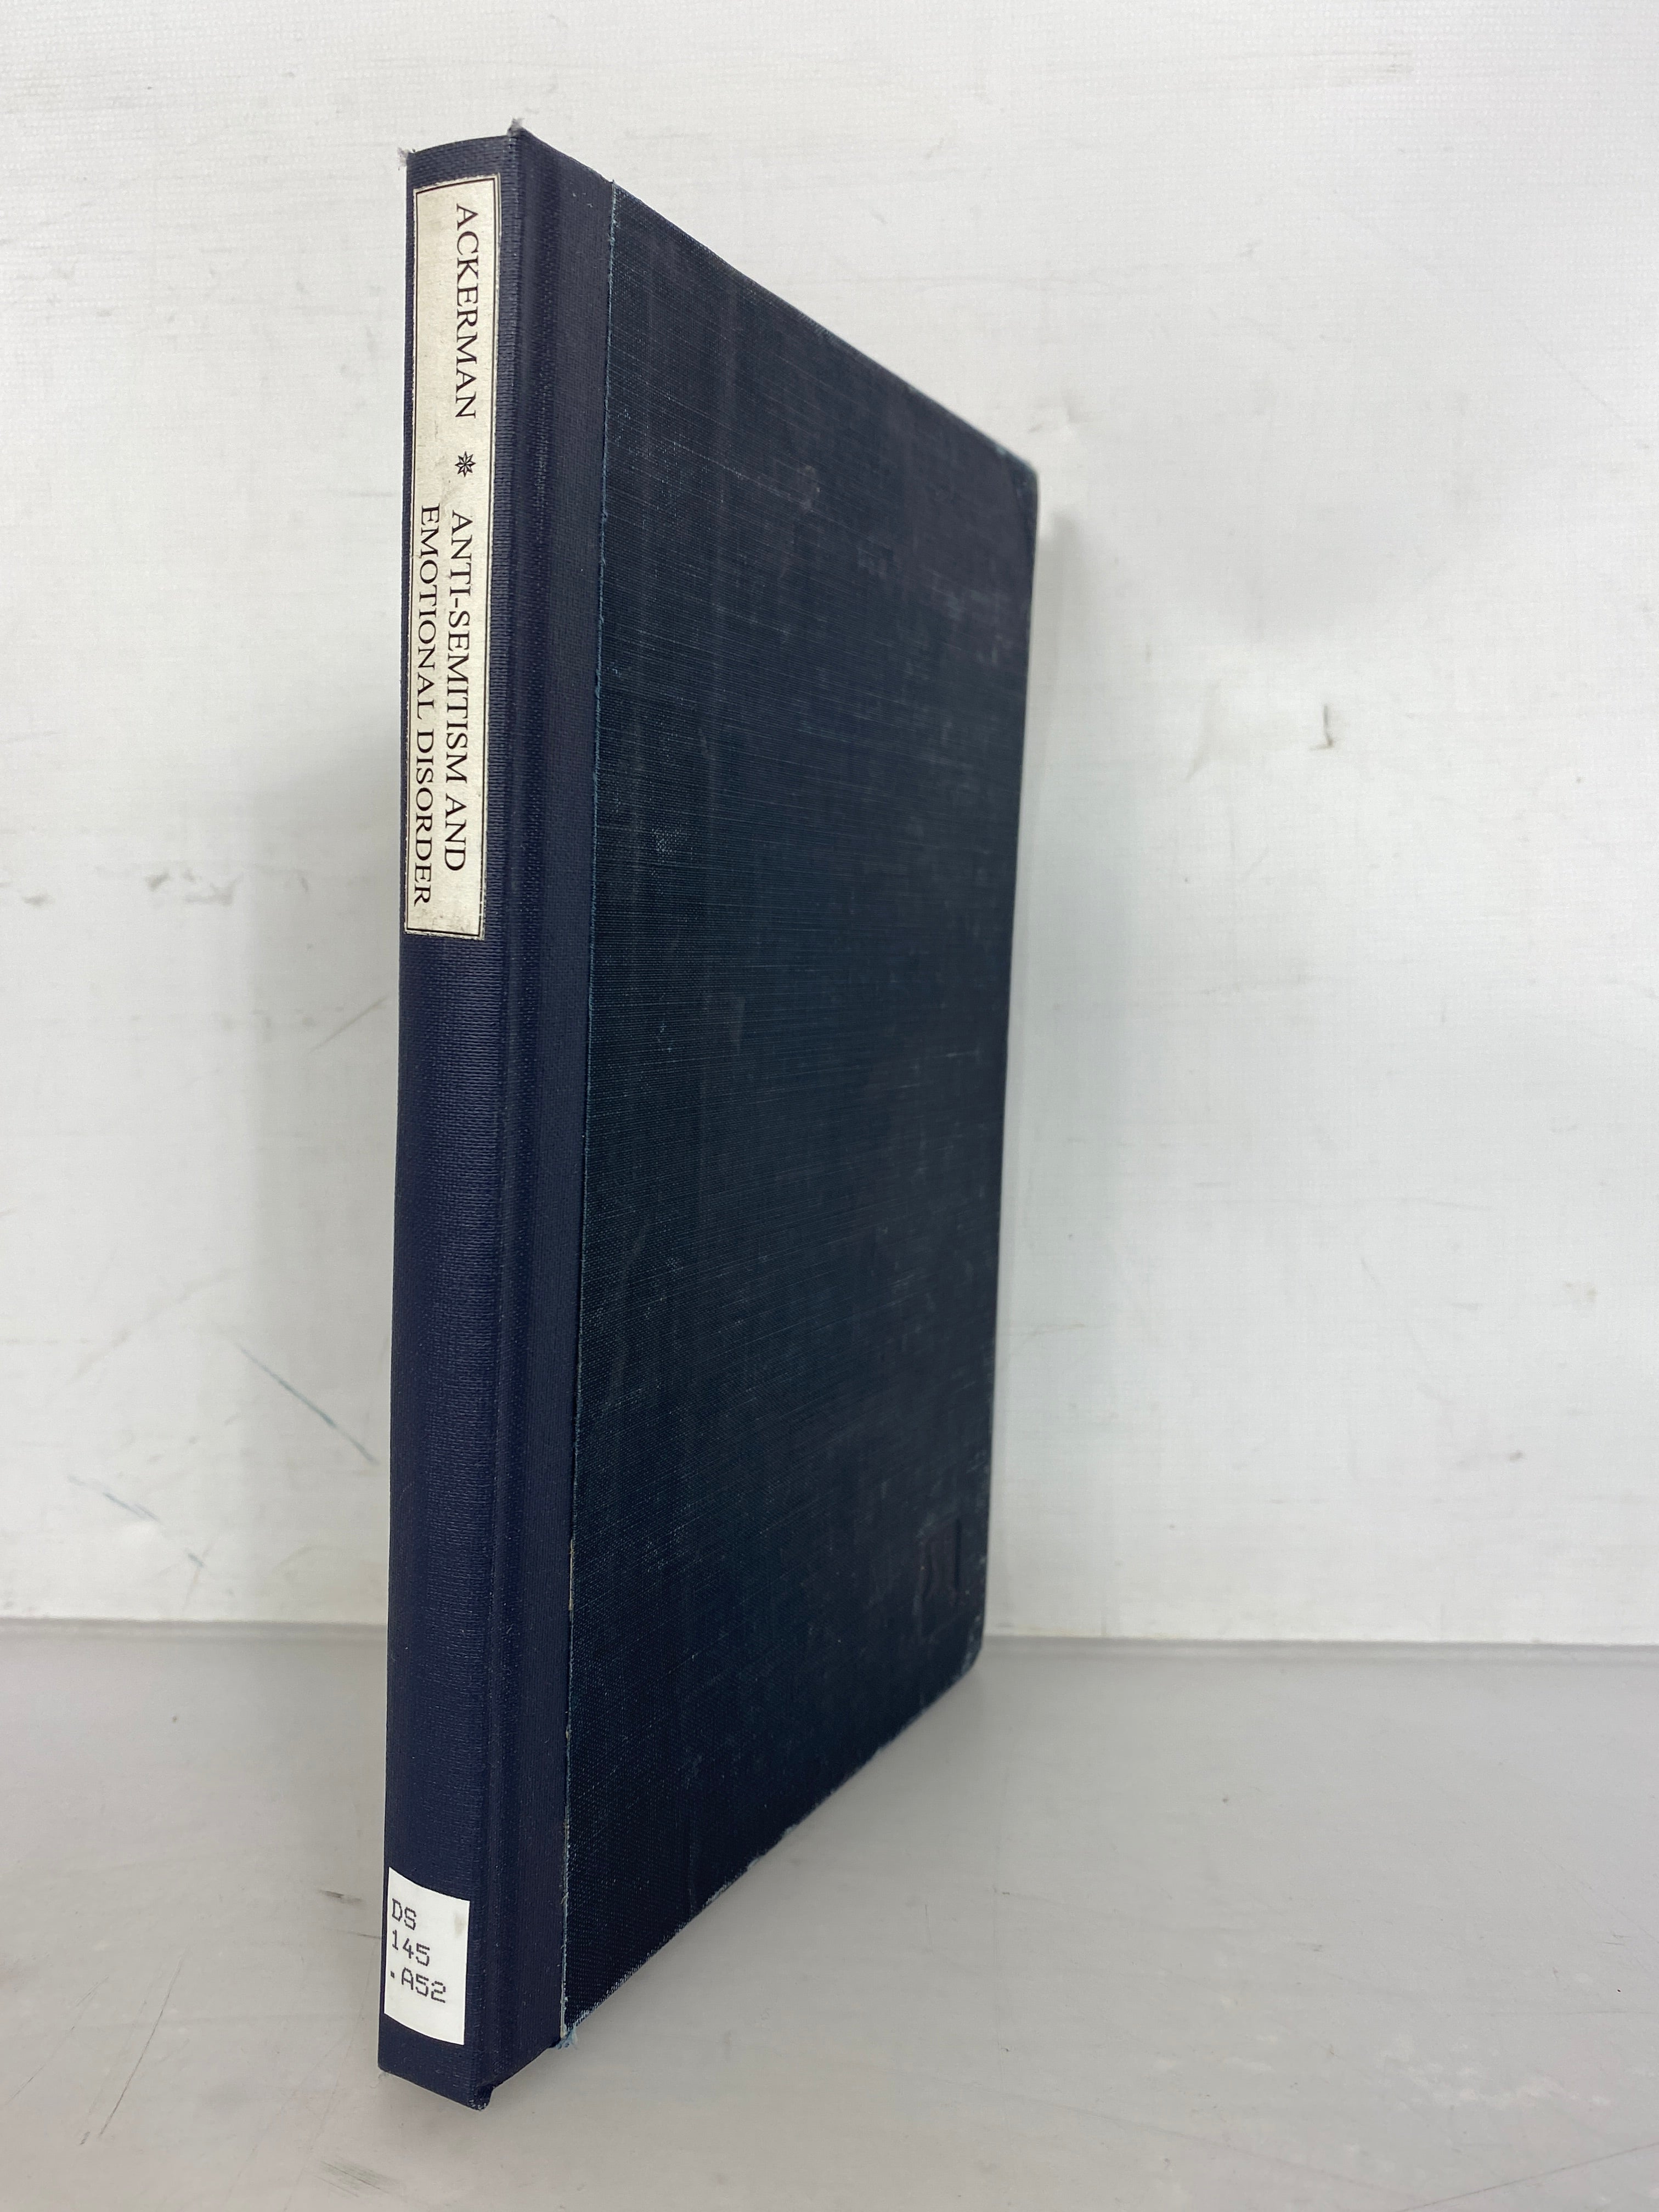 Anti-Semitism and Emotional Disorder by Ackerman and Jahoda 1950 First Edition Ex-Library HC